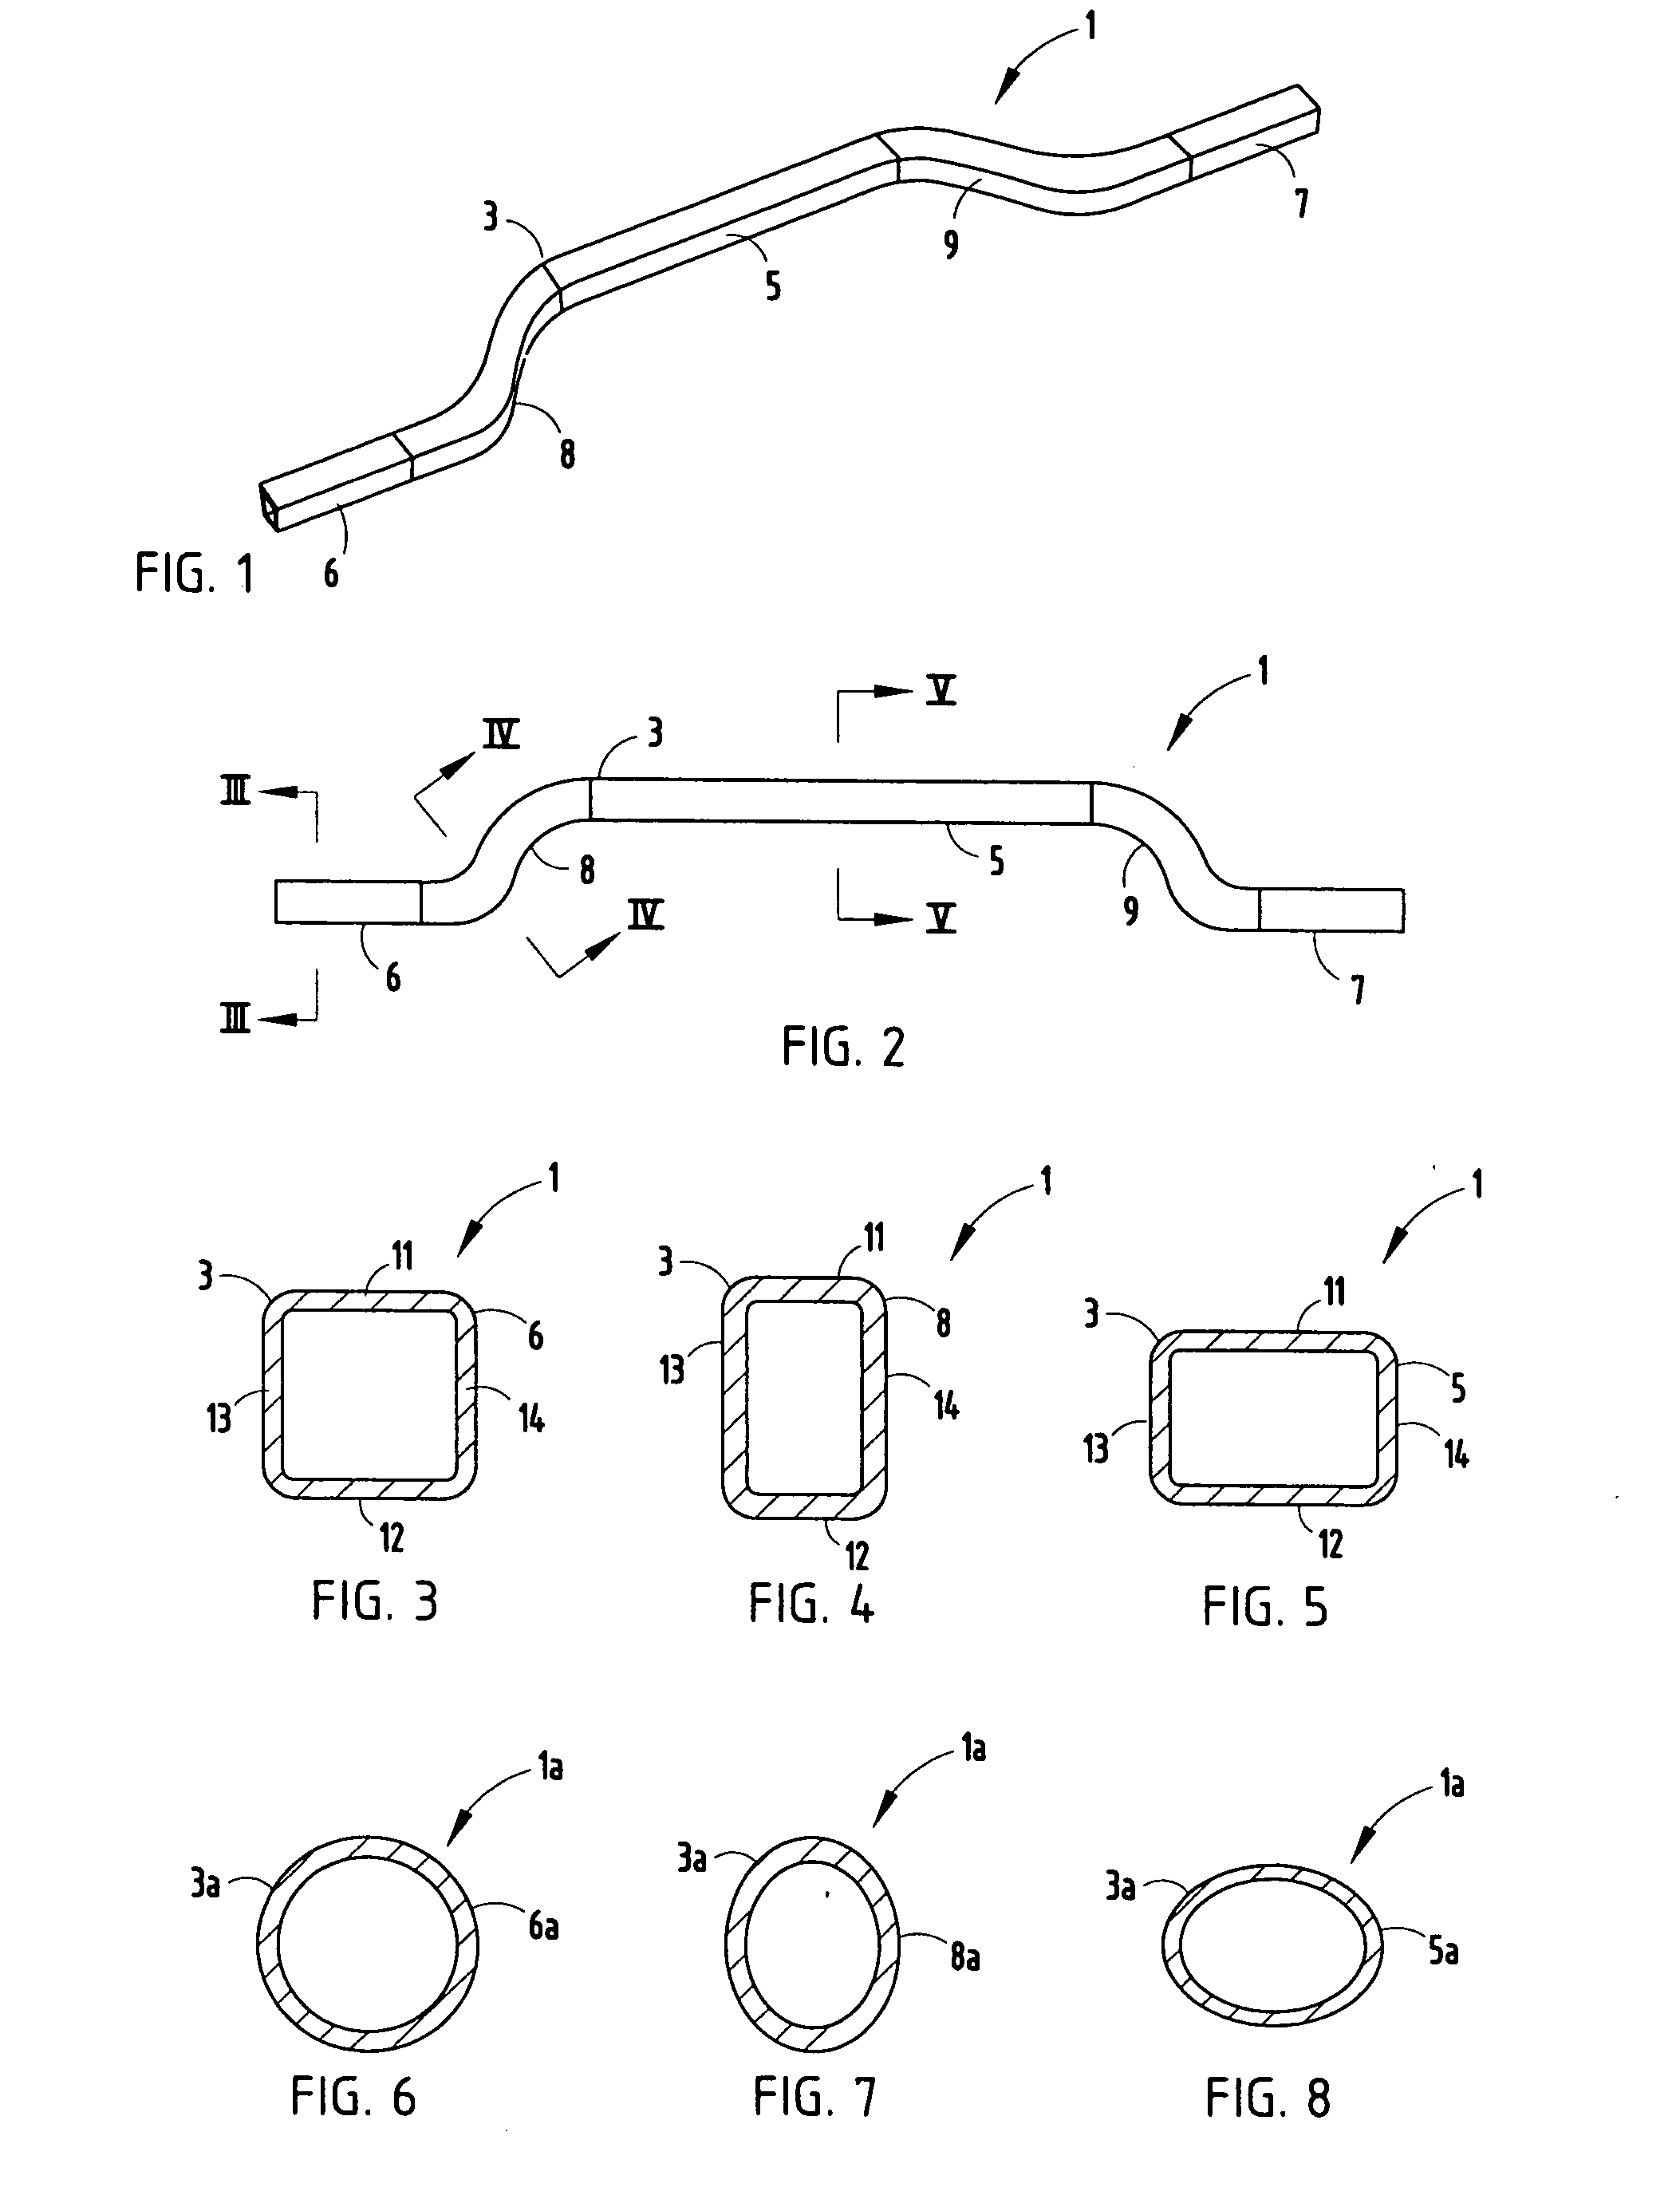 Method for making a non-driving vehicle axle beam